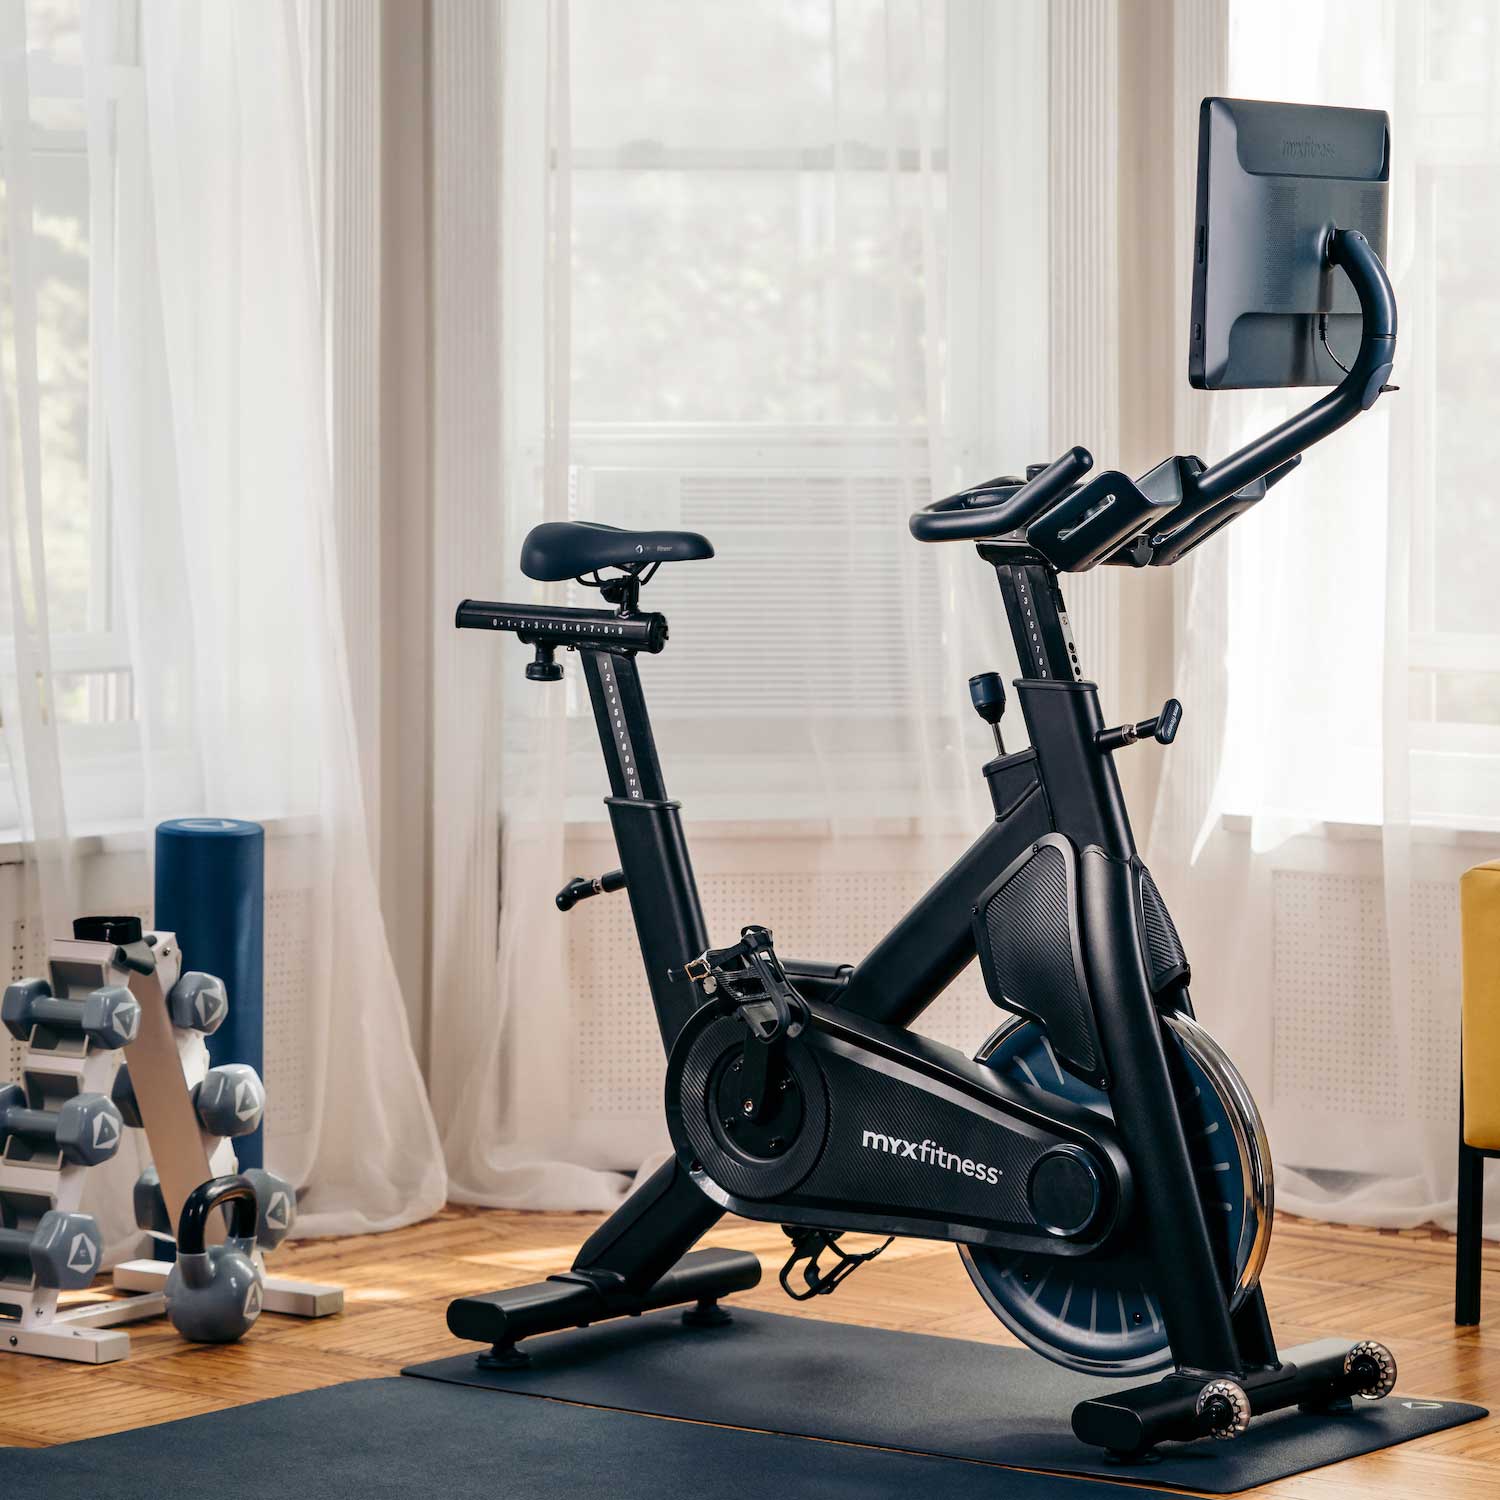 The future of fitness is NOW. Meet MYX II.